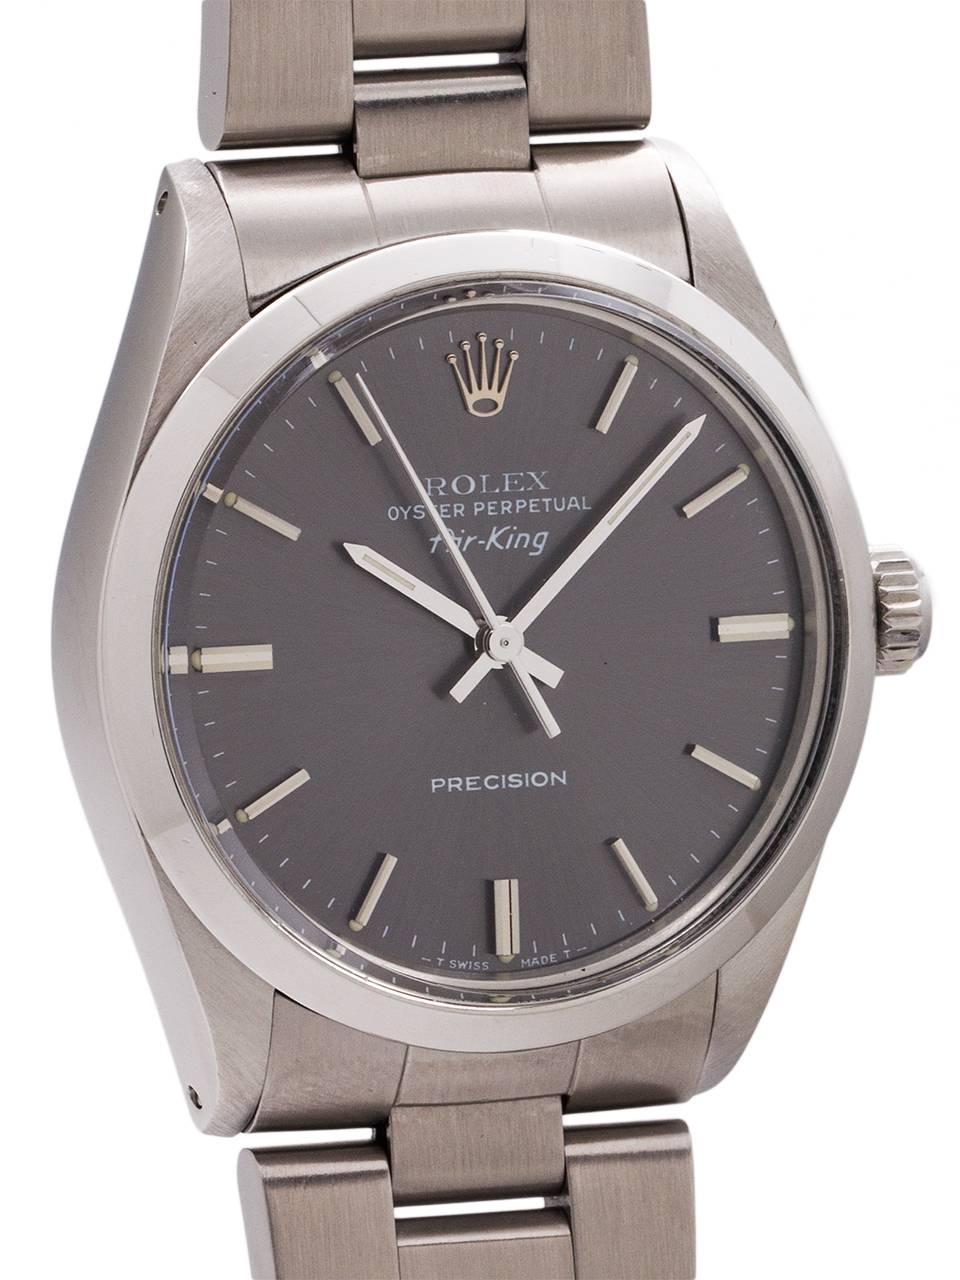 
An especially attractive and fine condition Rolex stainless steel Oyster Perpetual Airking ref 5500 serial #L9 million circa 1988. Featuring a 34mm diameter Oyster case with smooth bezel and acrylic crystal. With original metallic gray dial with